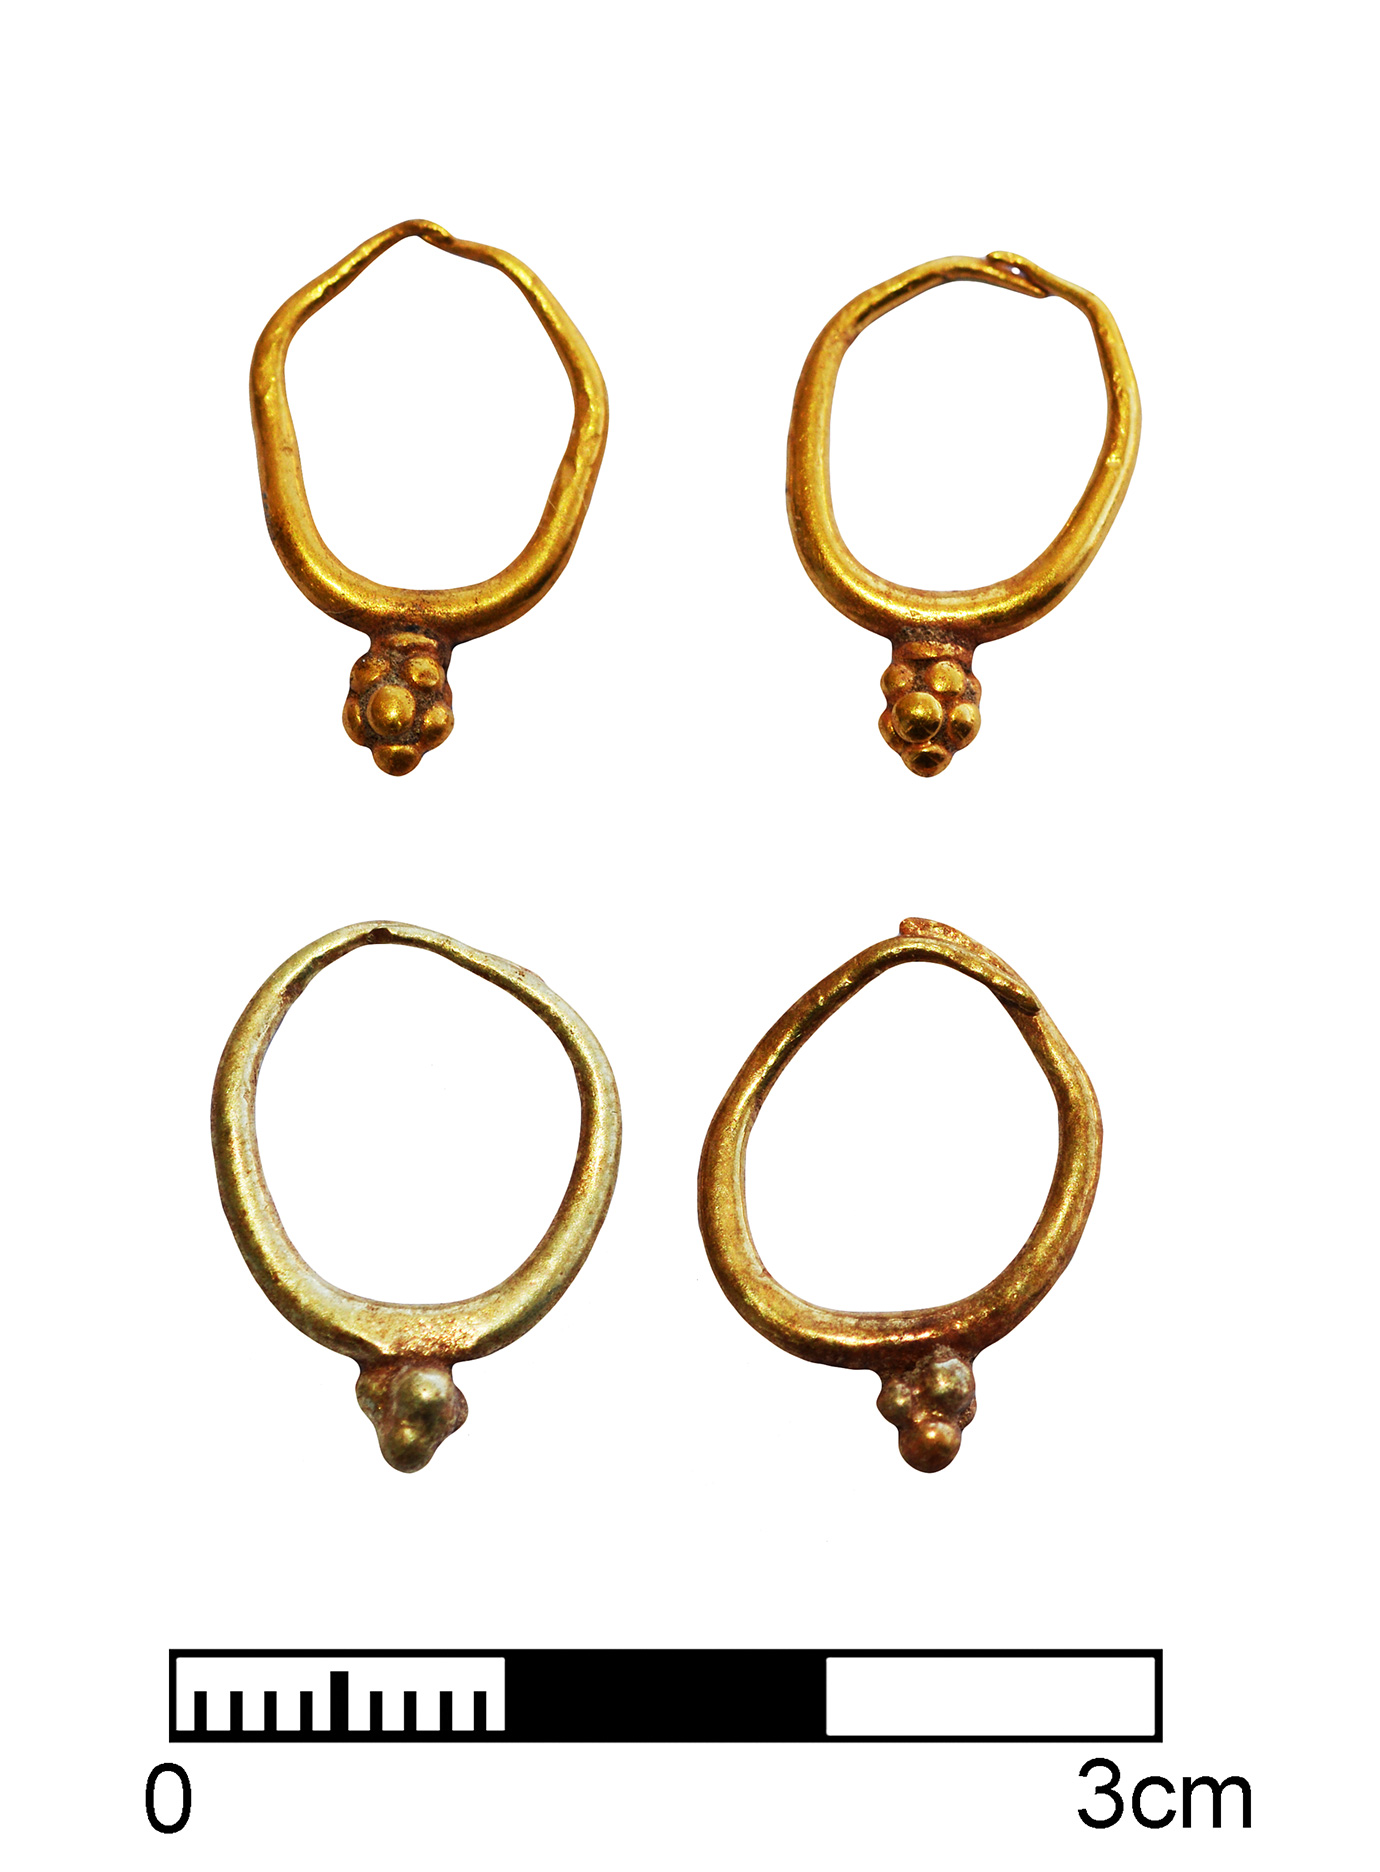 wo pairs of earrings of gold, c. 1400-1300 BC. Photo: Peter Fischer.